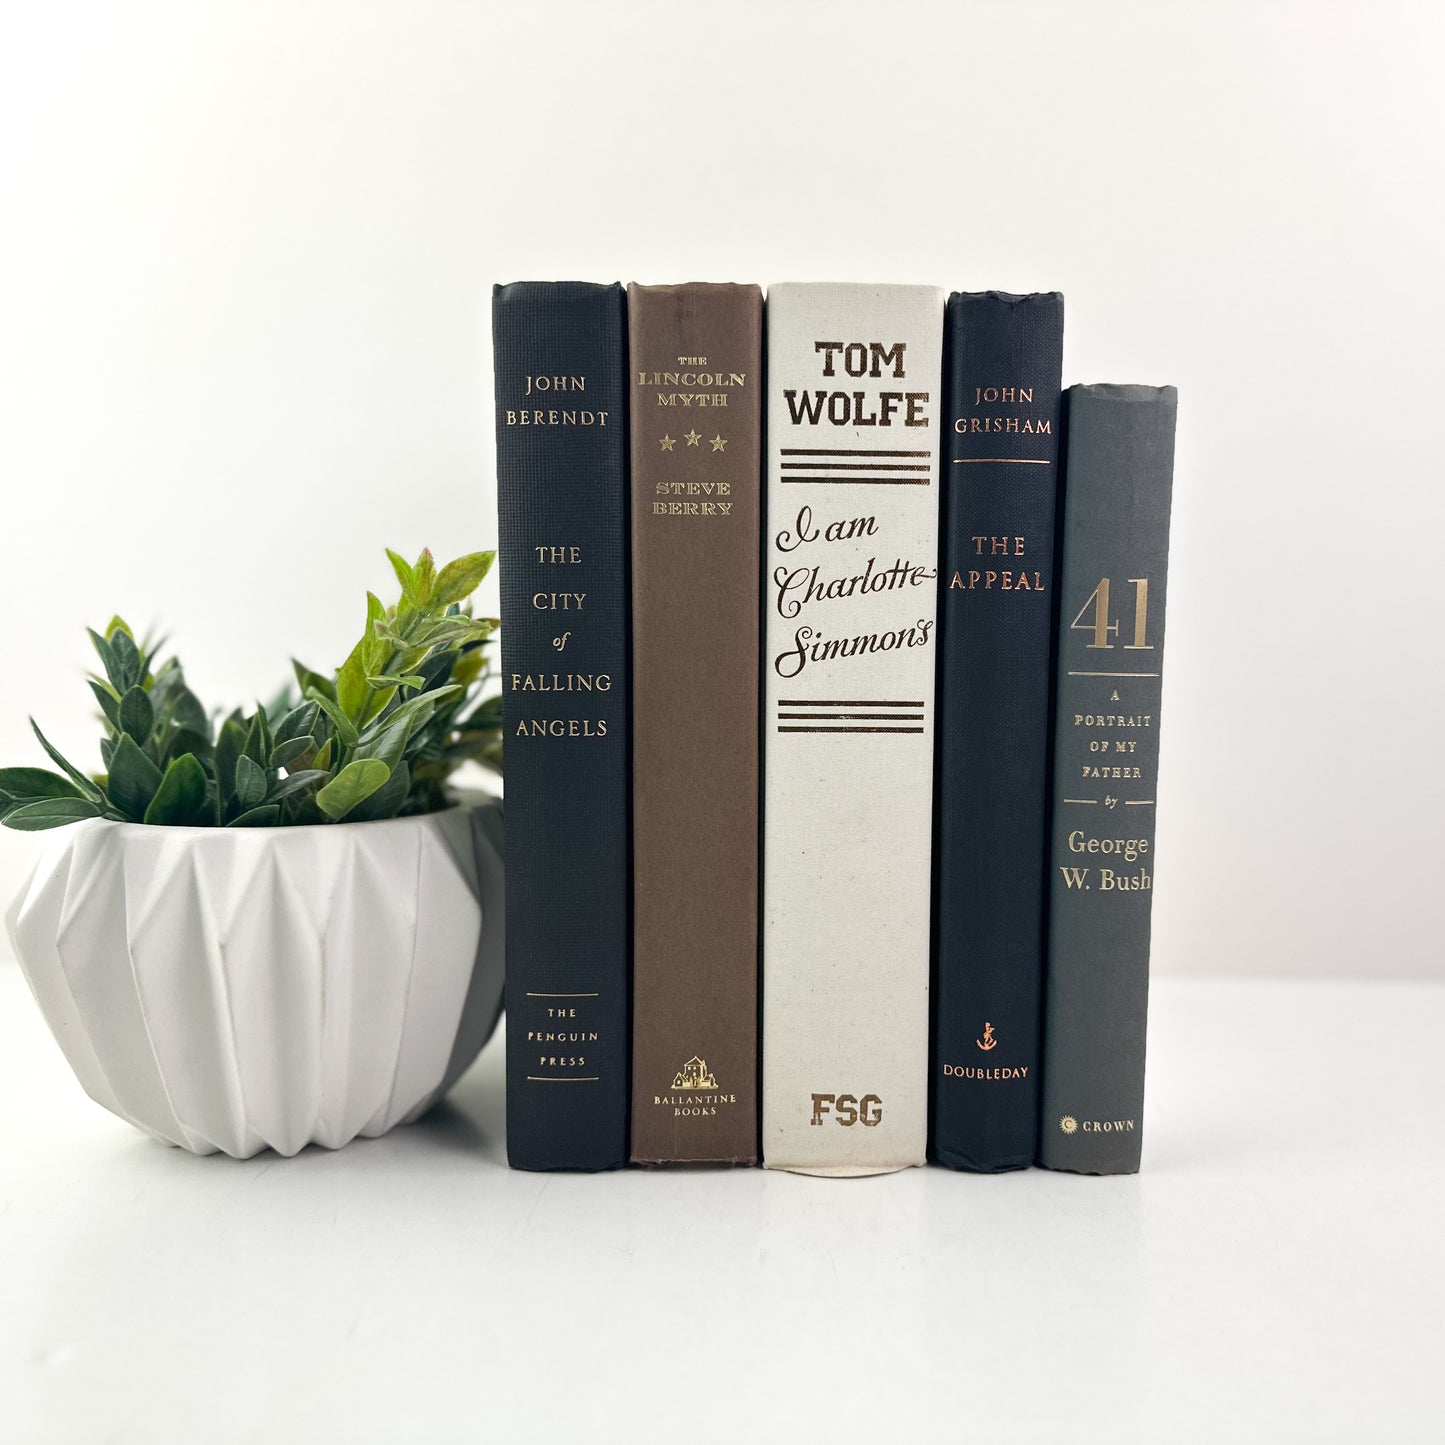 Brown and Gray Books by the Foot